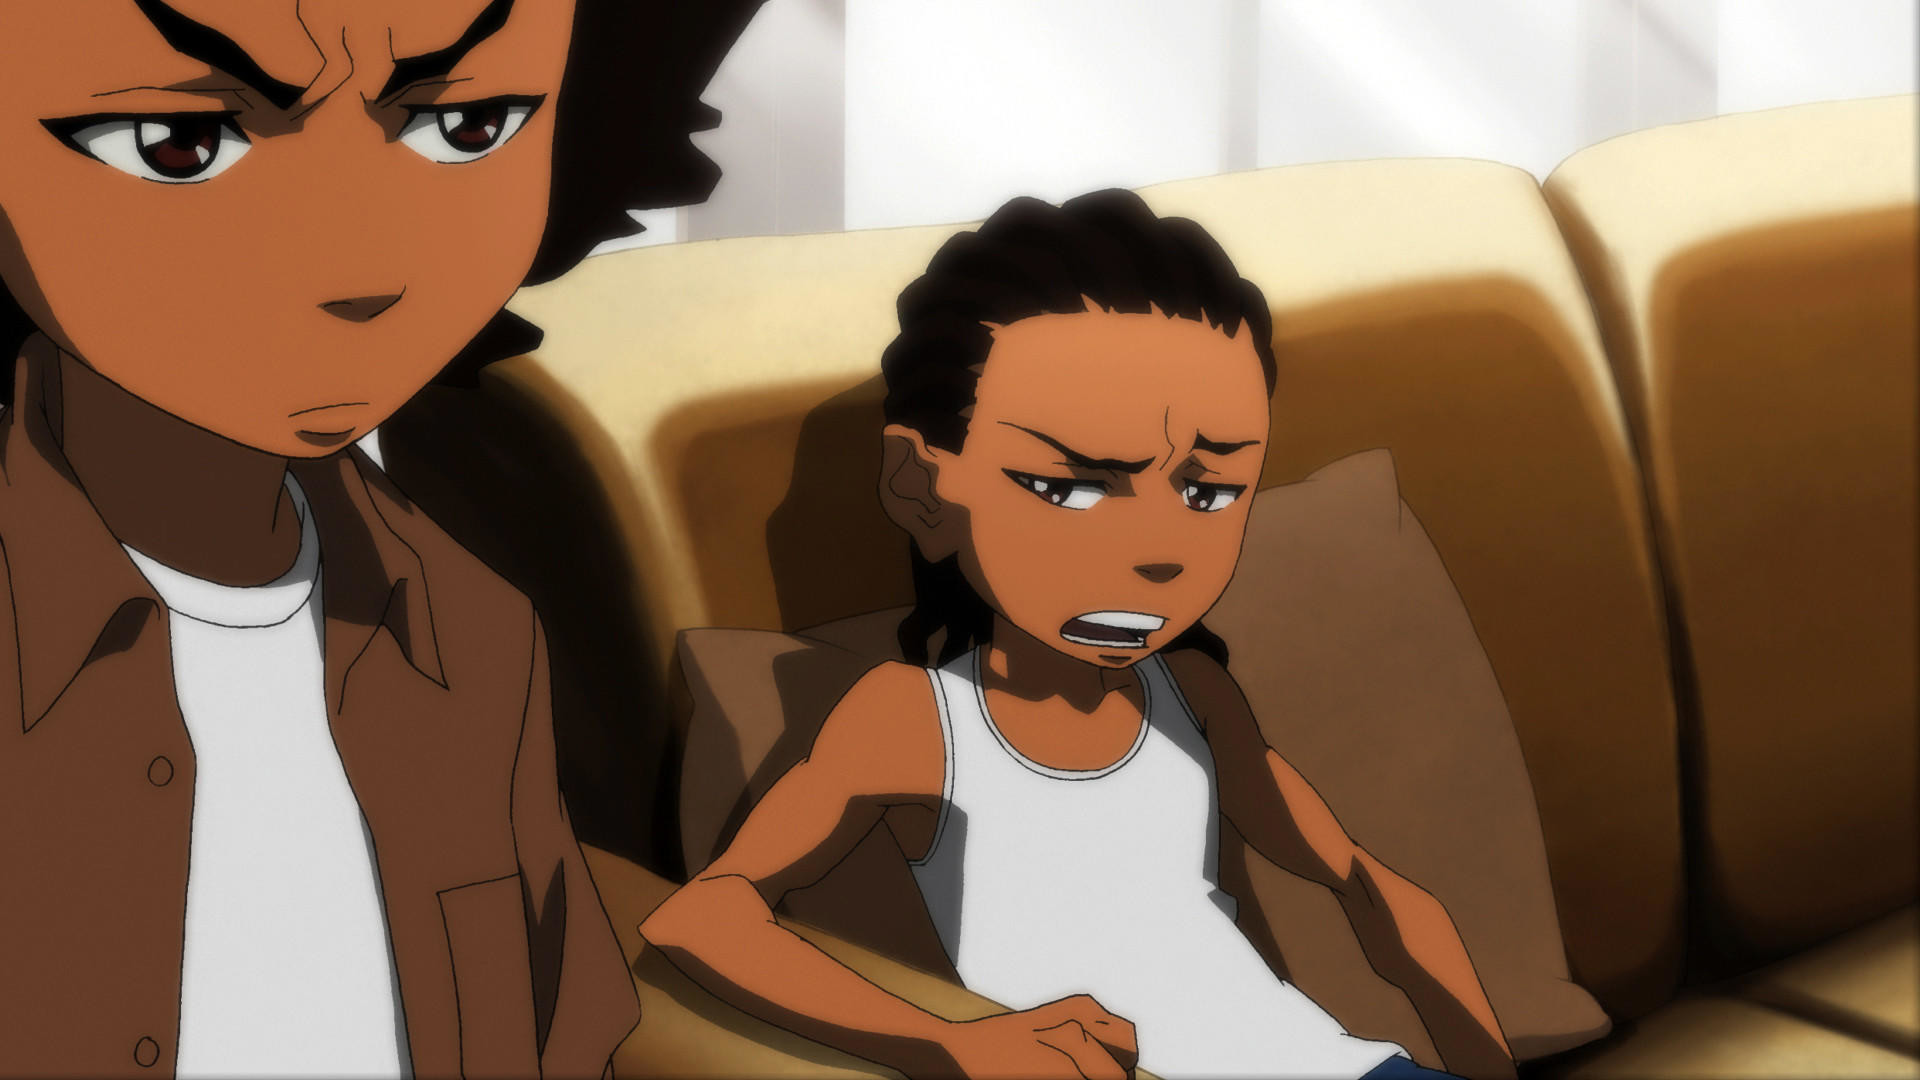 Huey Freeman, left, and brother Riley Freeman both voiced by Regina King